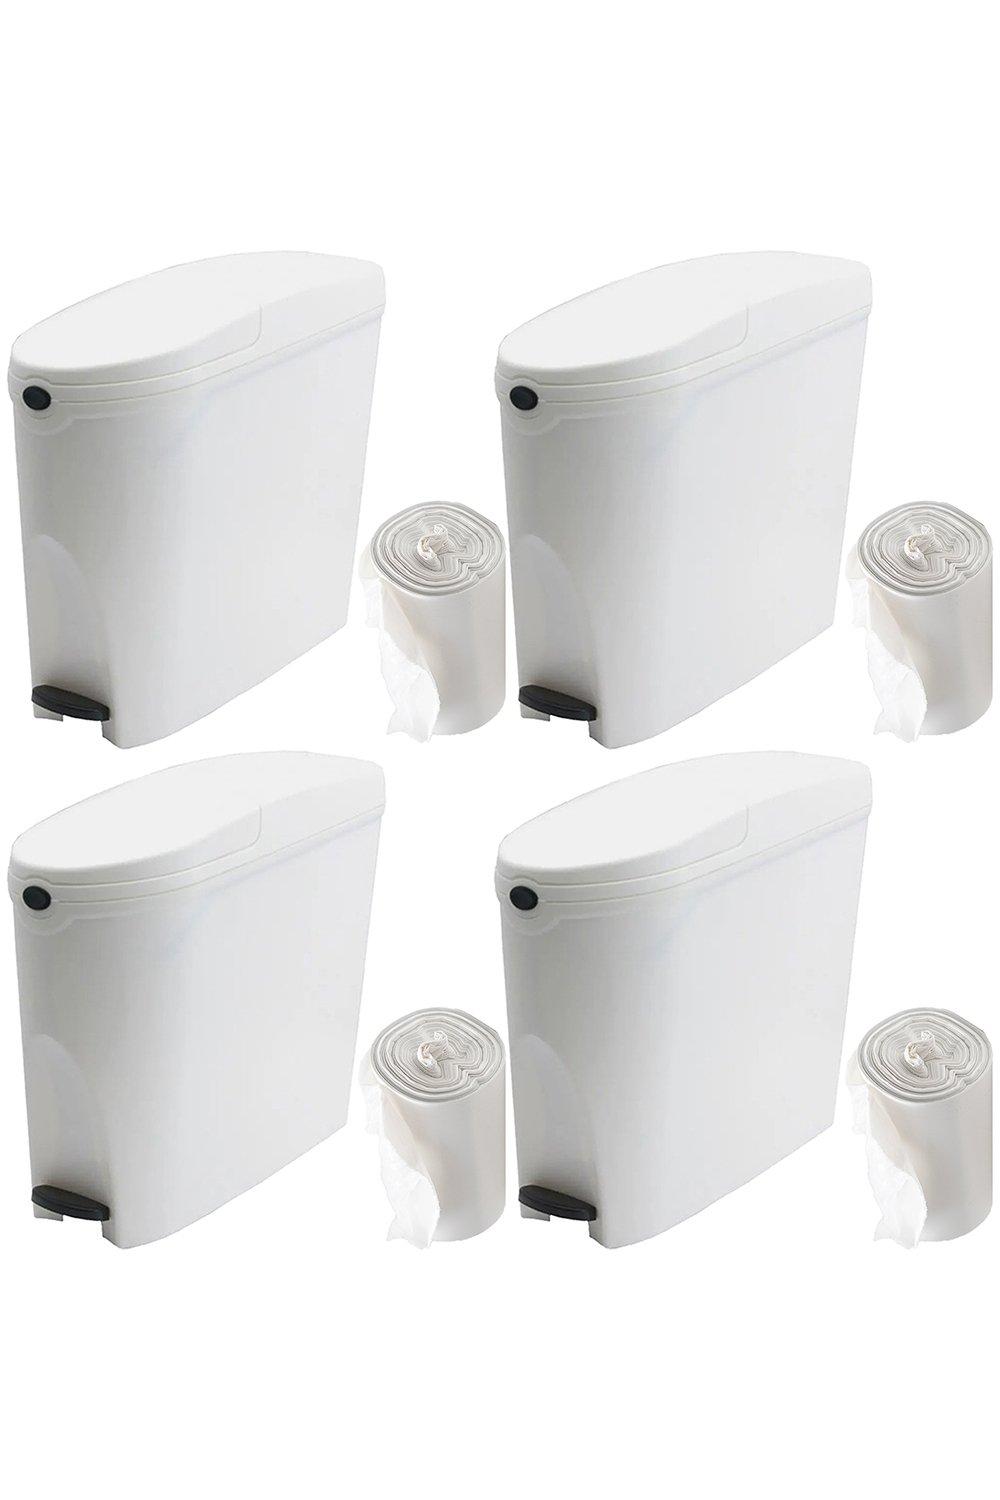 White Pedal Operated Toilet Sanitary Bin 4 x 20L Capacity & 200 Liners